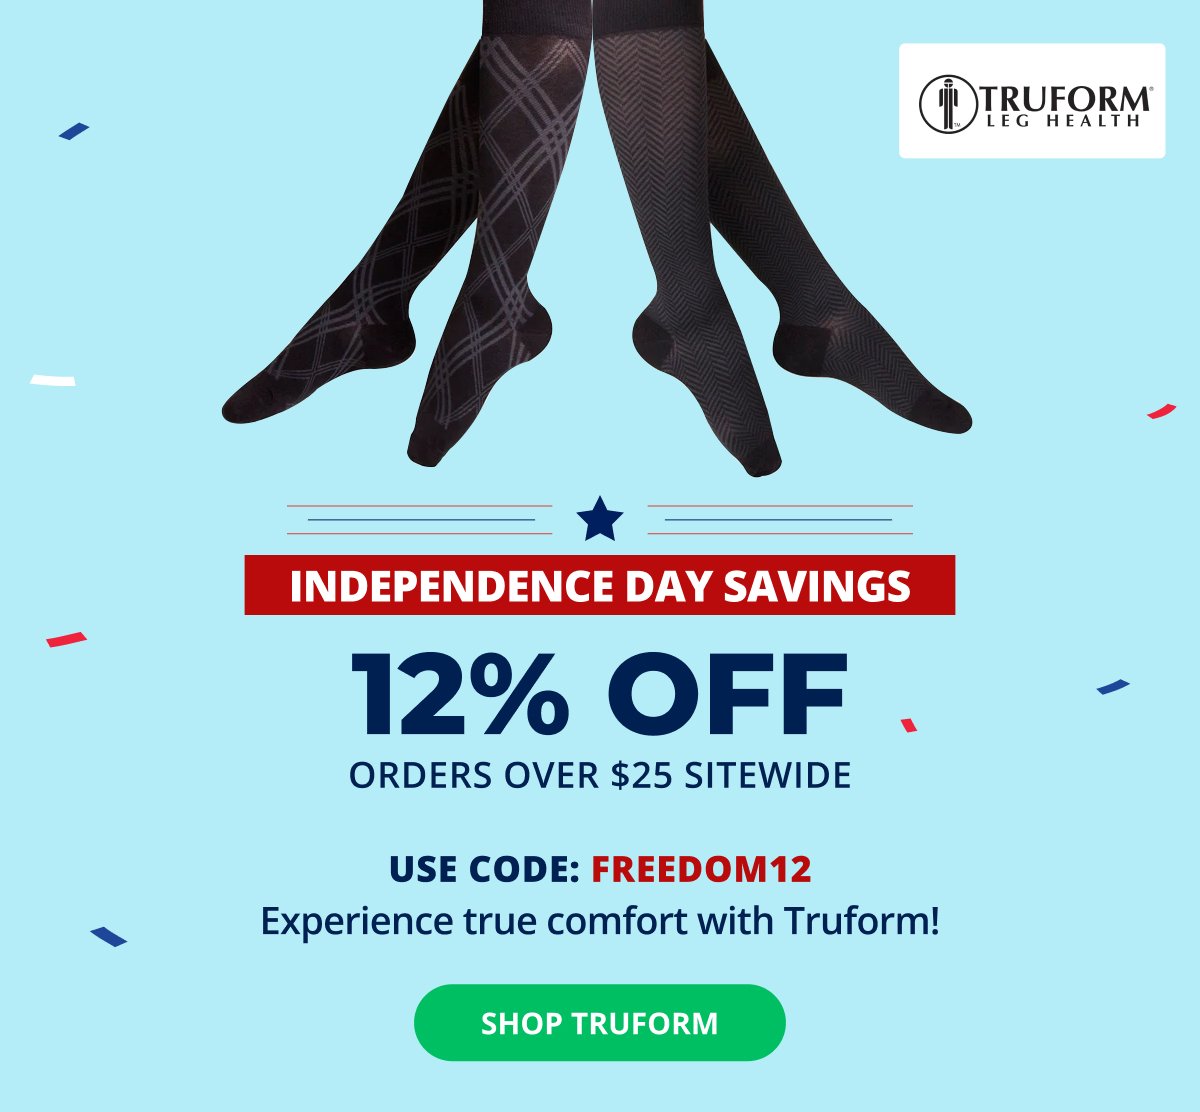 Truform – Compression Wear Solutions Independence Day Savings 12% OFF orders over \\$25 SITEWIDE Use Code: FREEDOM12 Experience true comfort with Truform! → SHOP TRUFORM